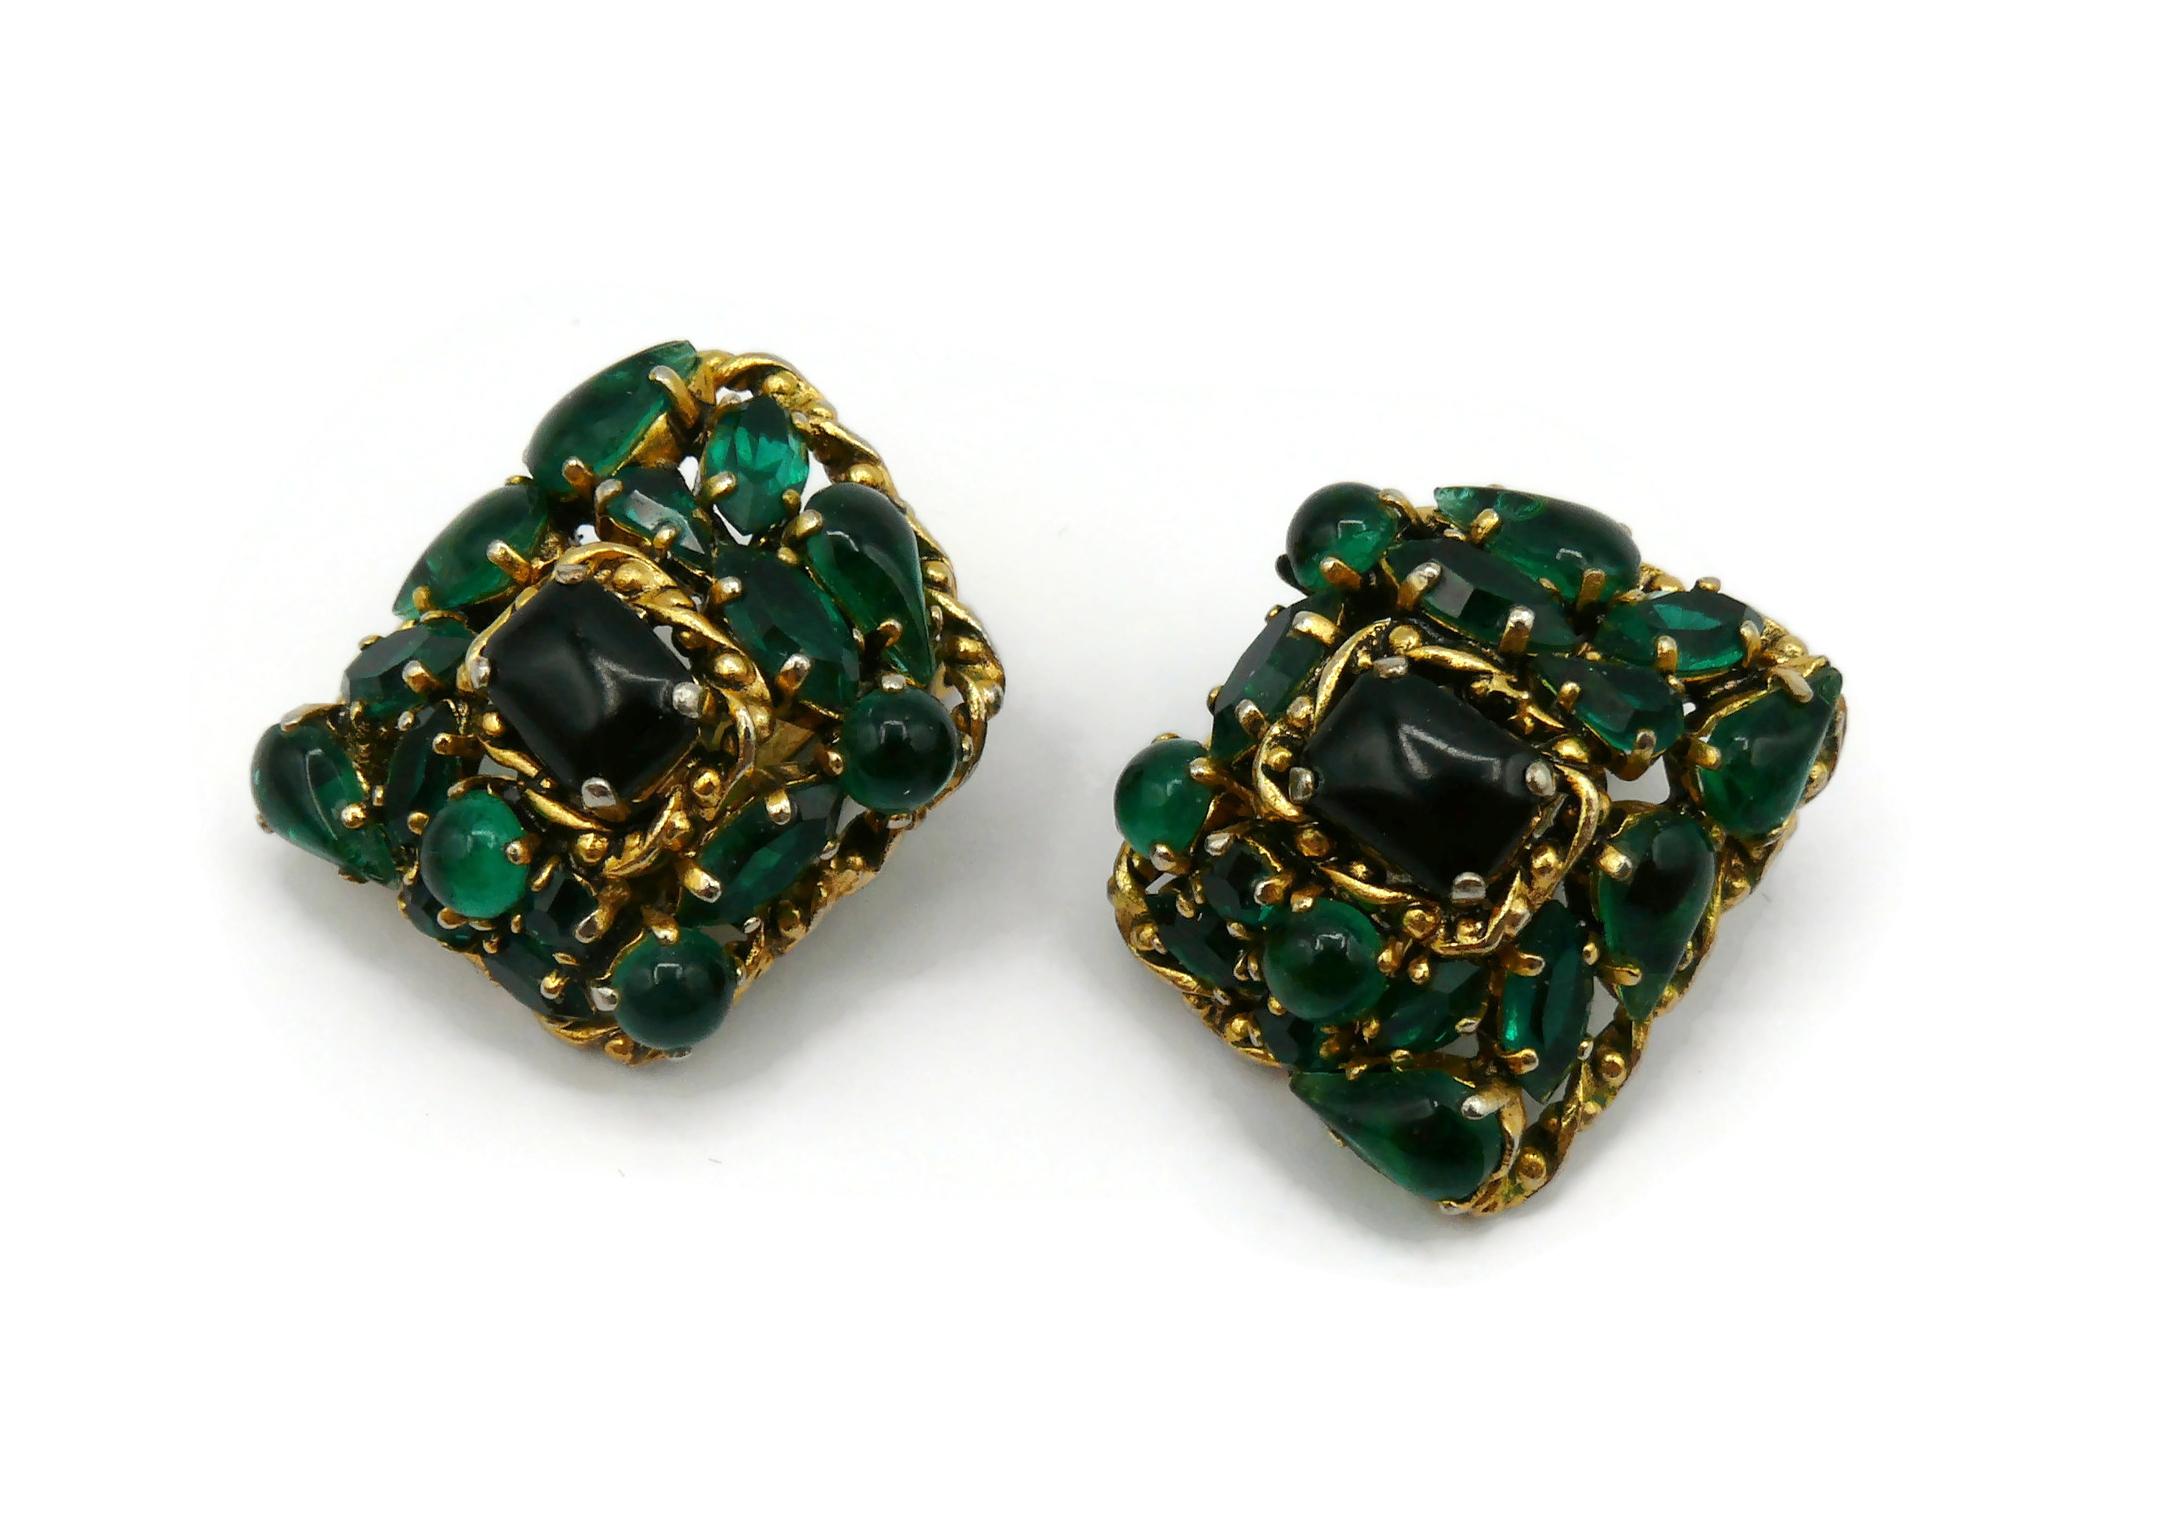 CHRISTIAN DIOR Vintage Jewelled Clip-On Earrings, 1963 For Sale 2